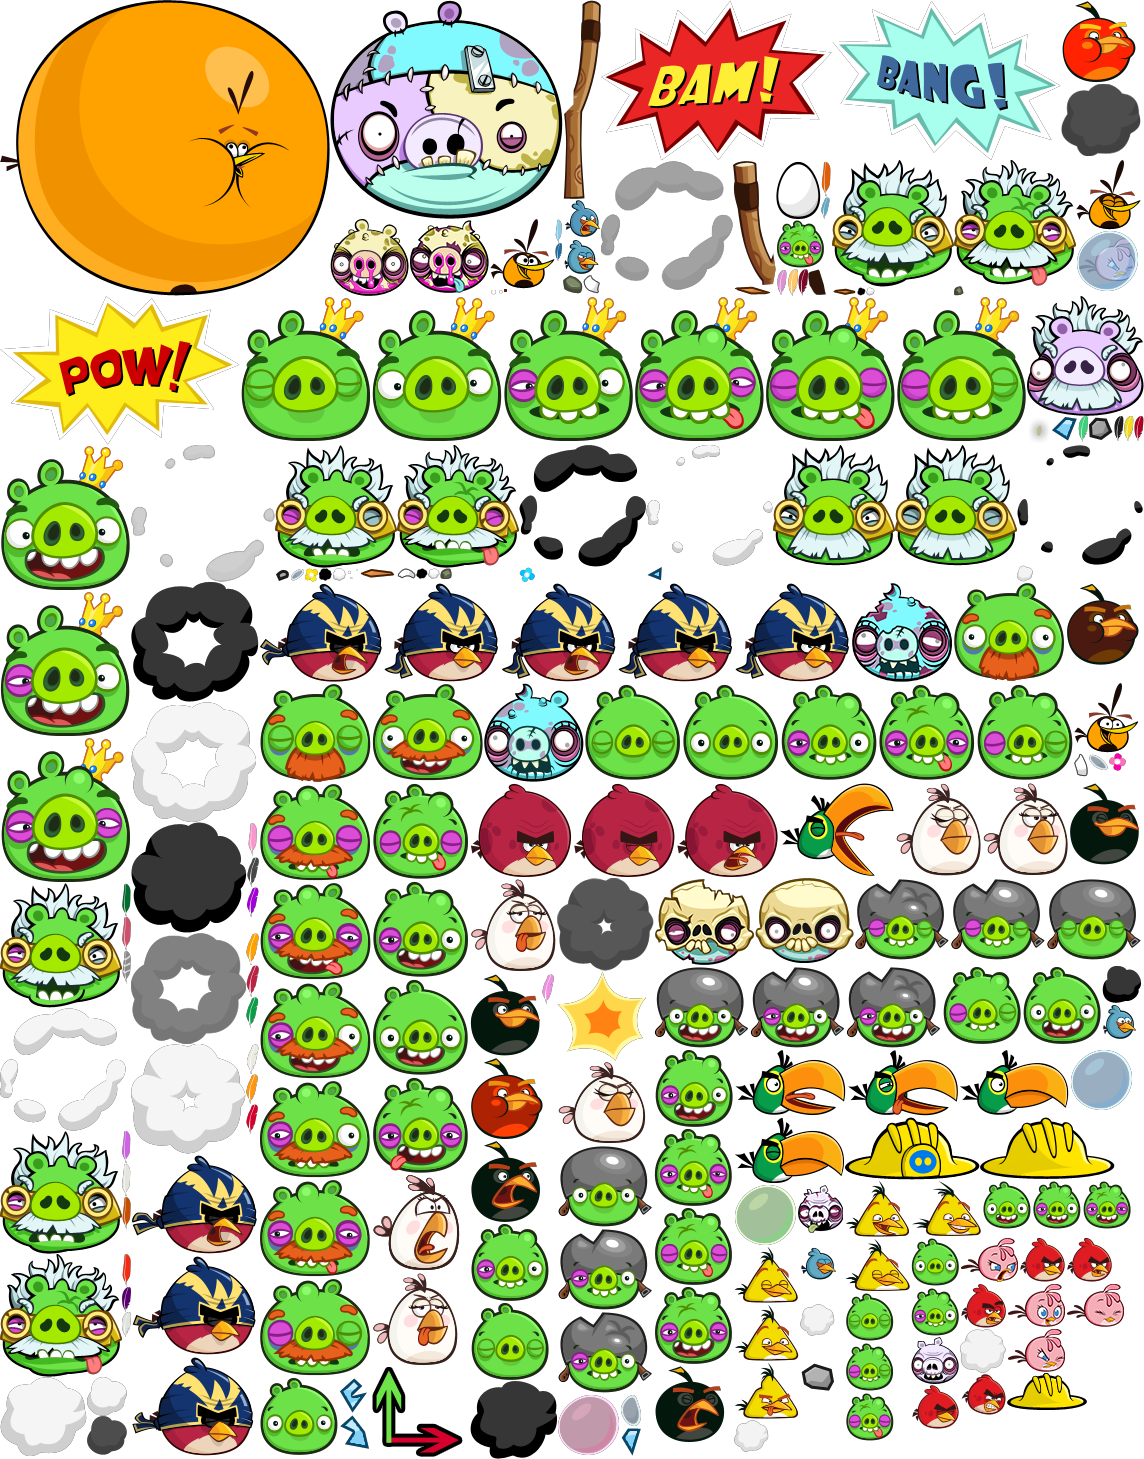 angry birds friends mod